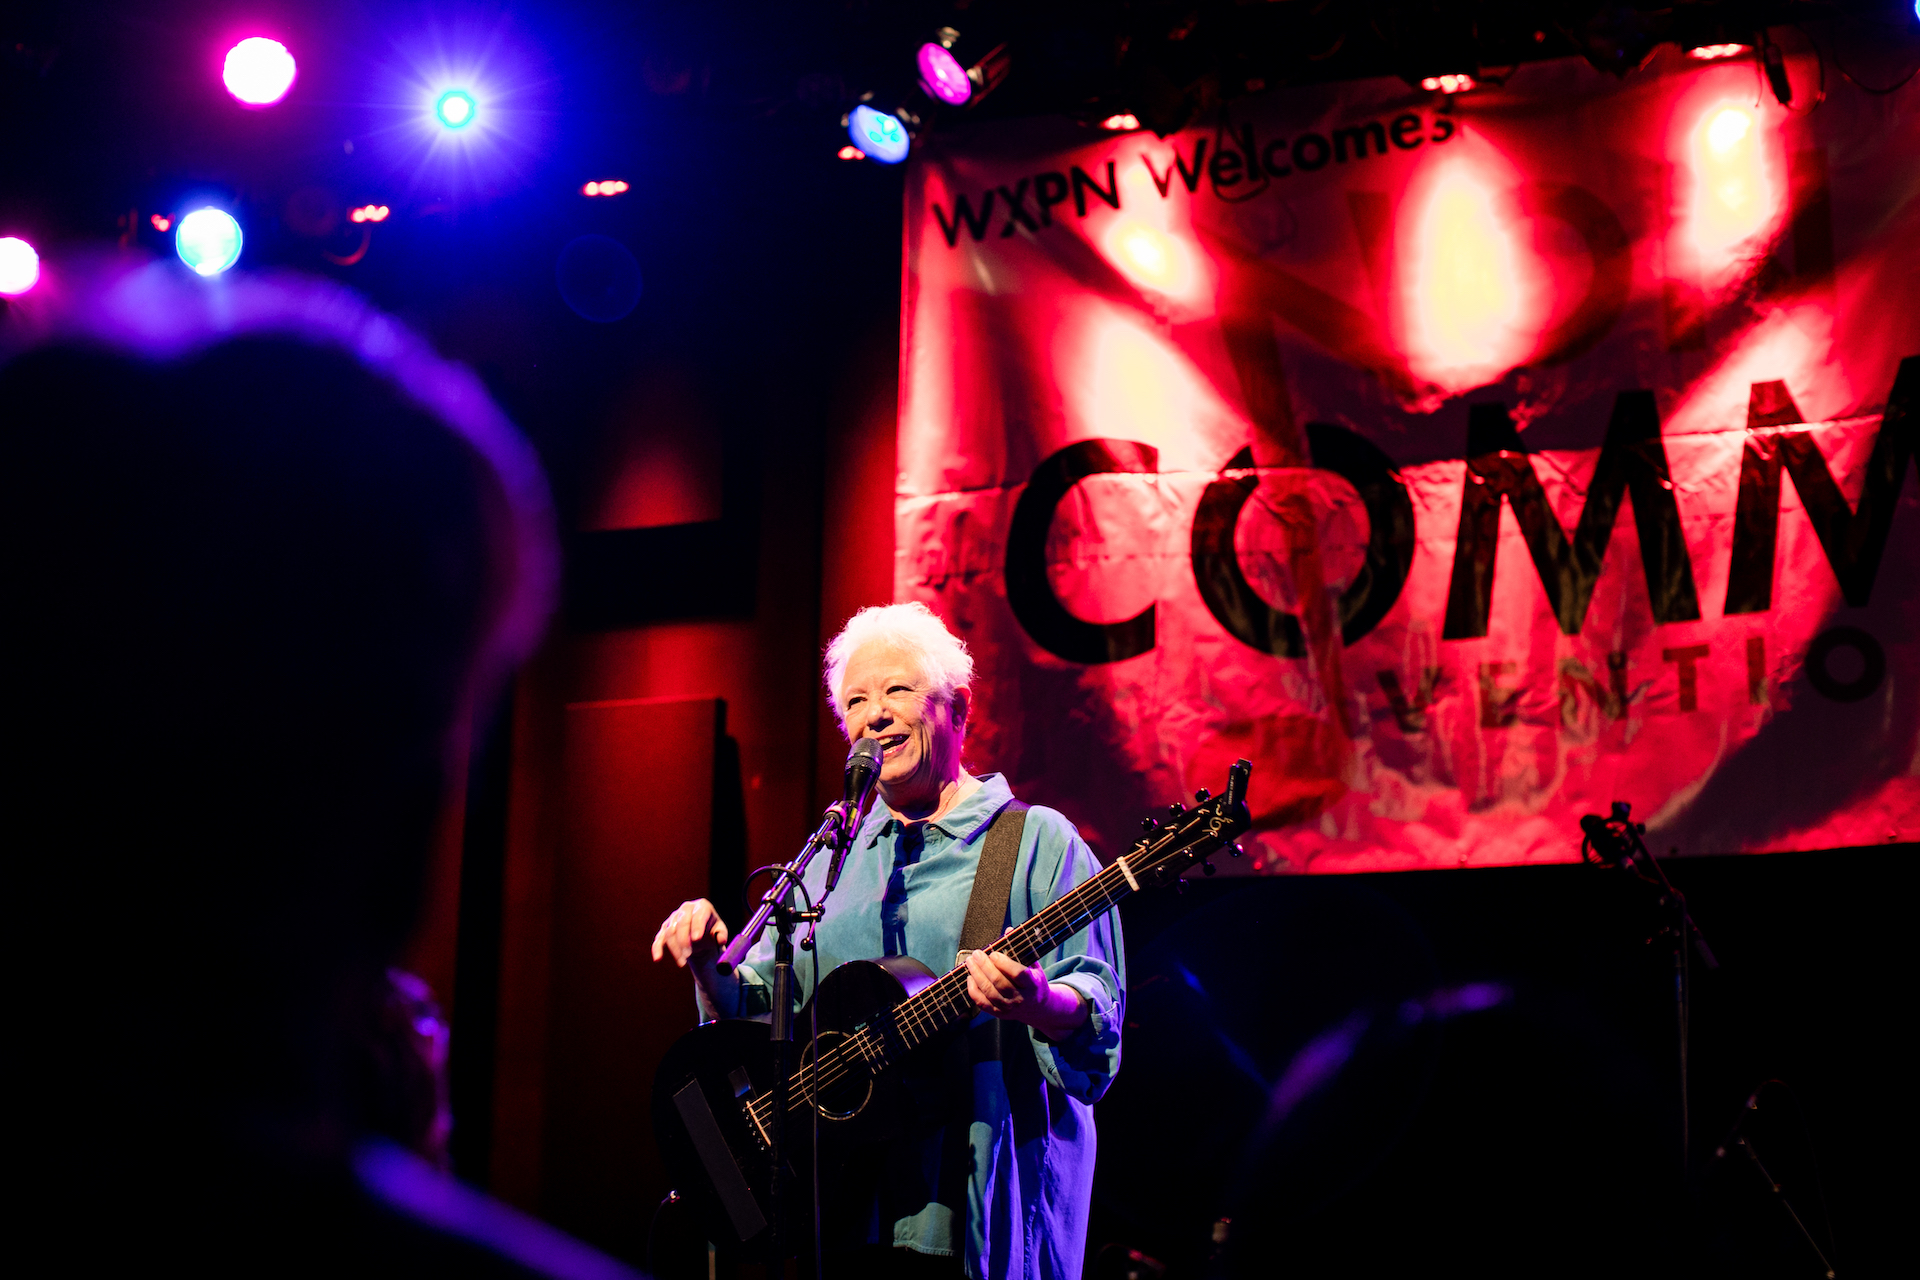 Janis Ian's solo acoustic set at #NONCOMM was resonant and 